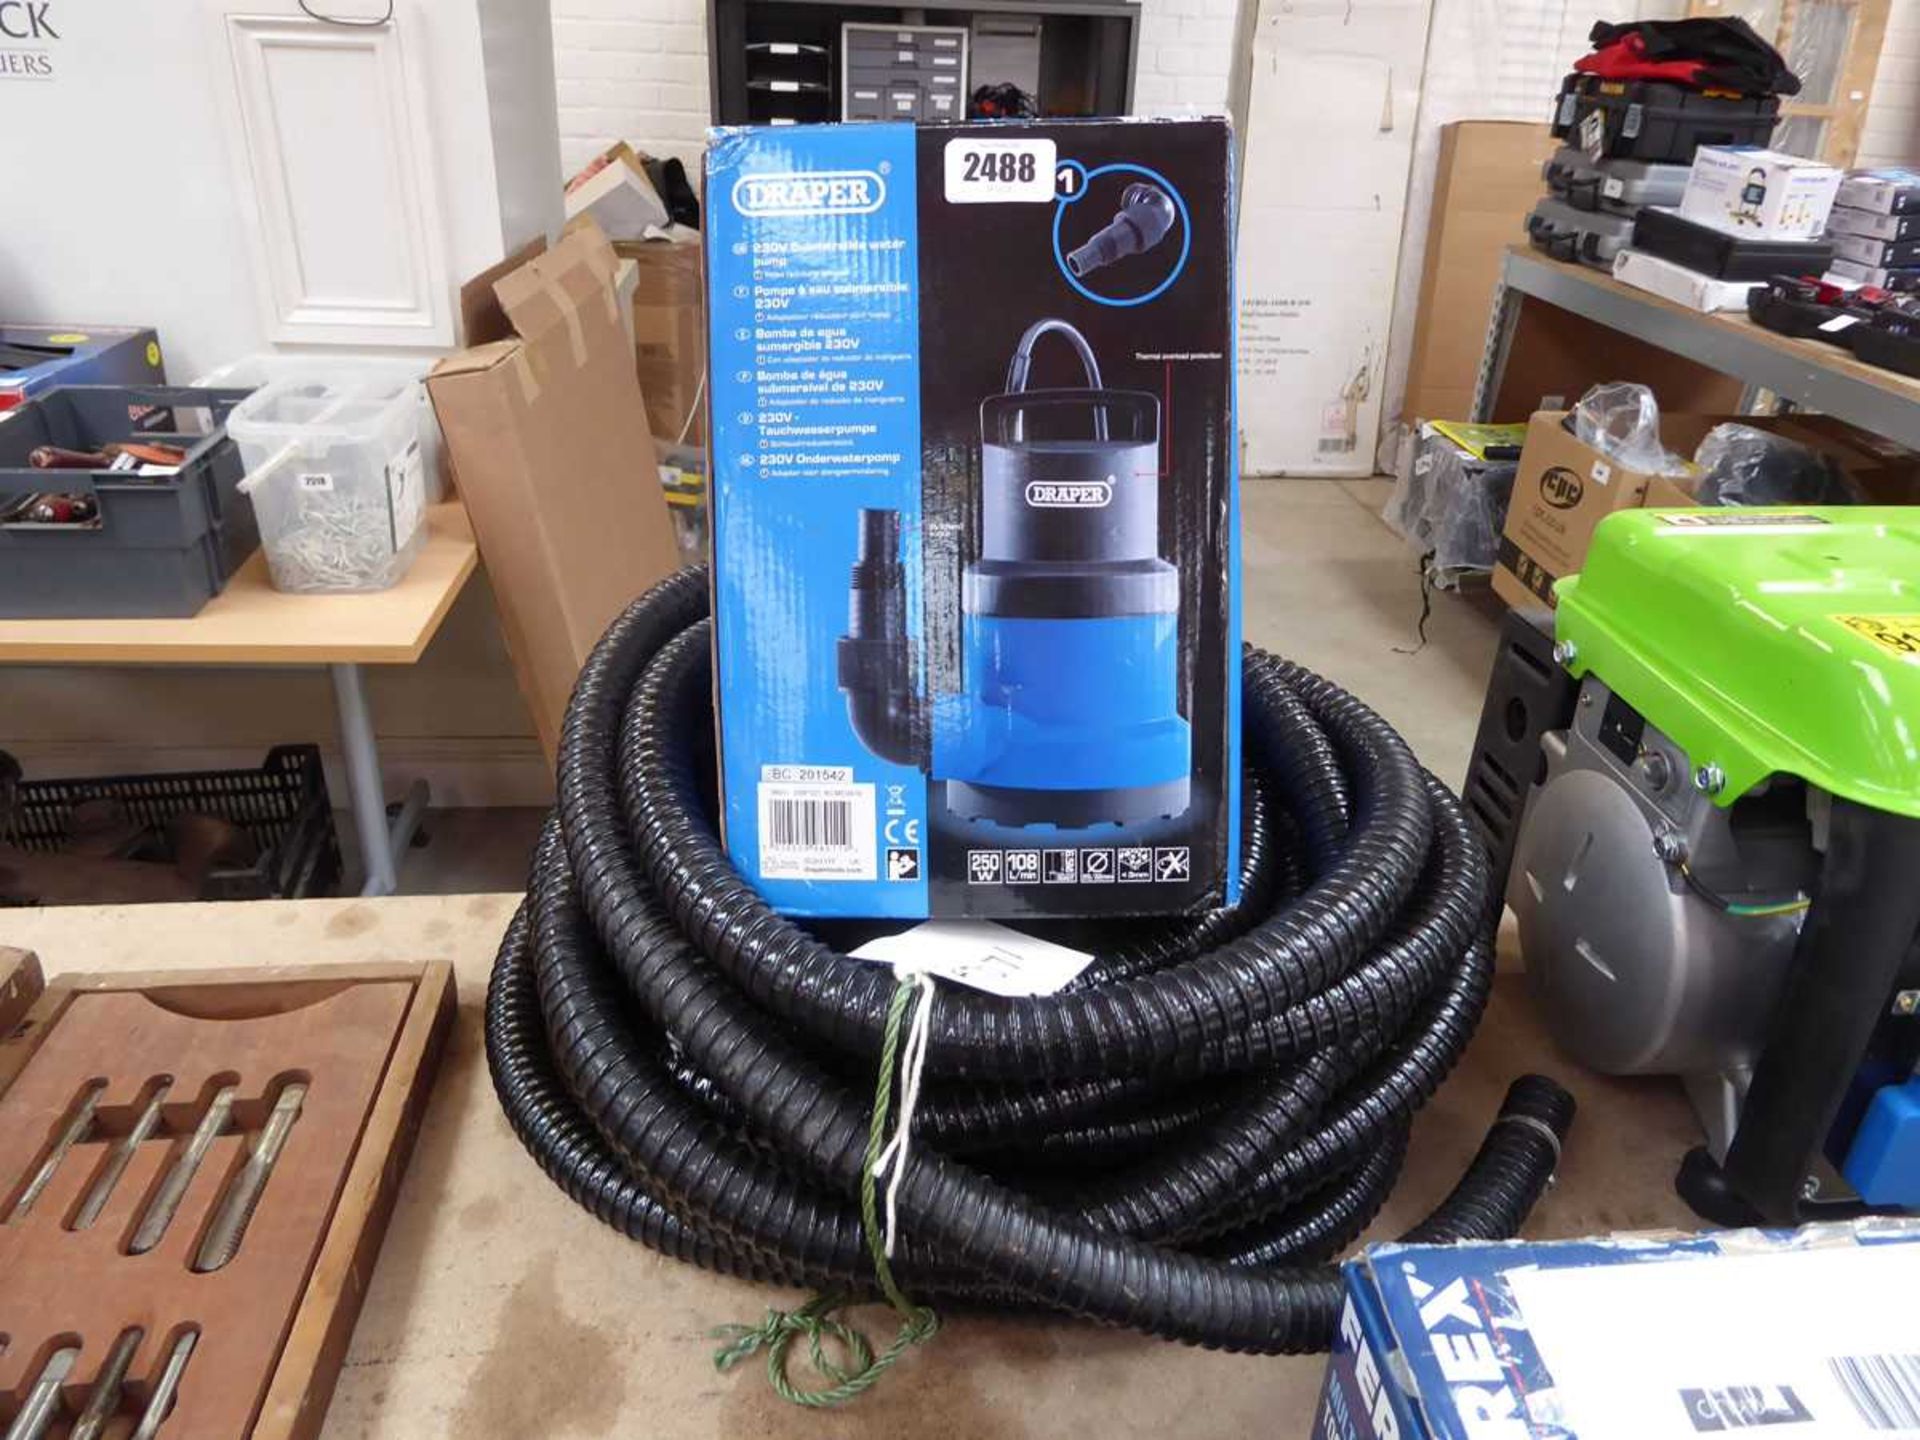 Draper 230V submersible water pump with hose